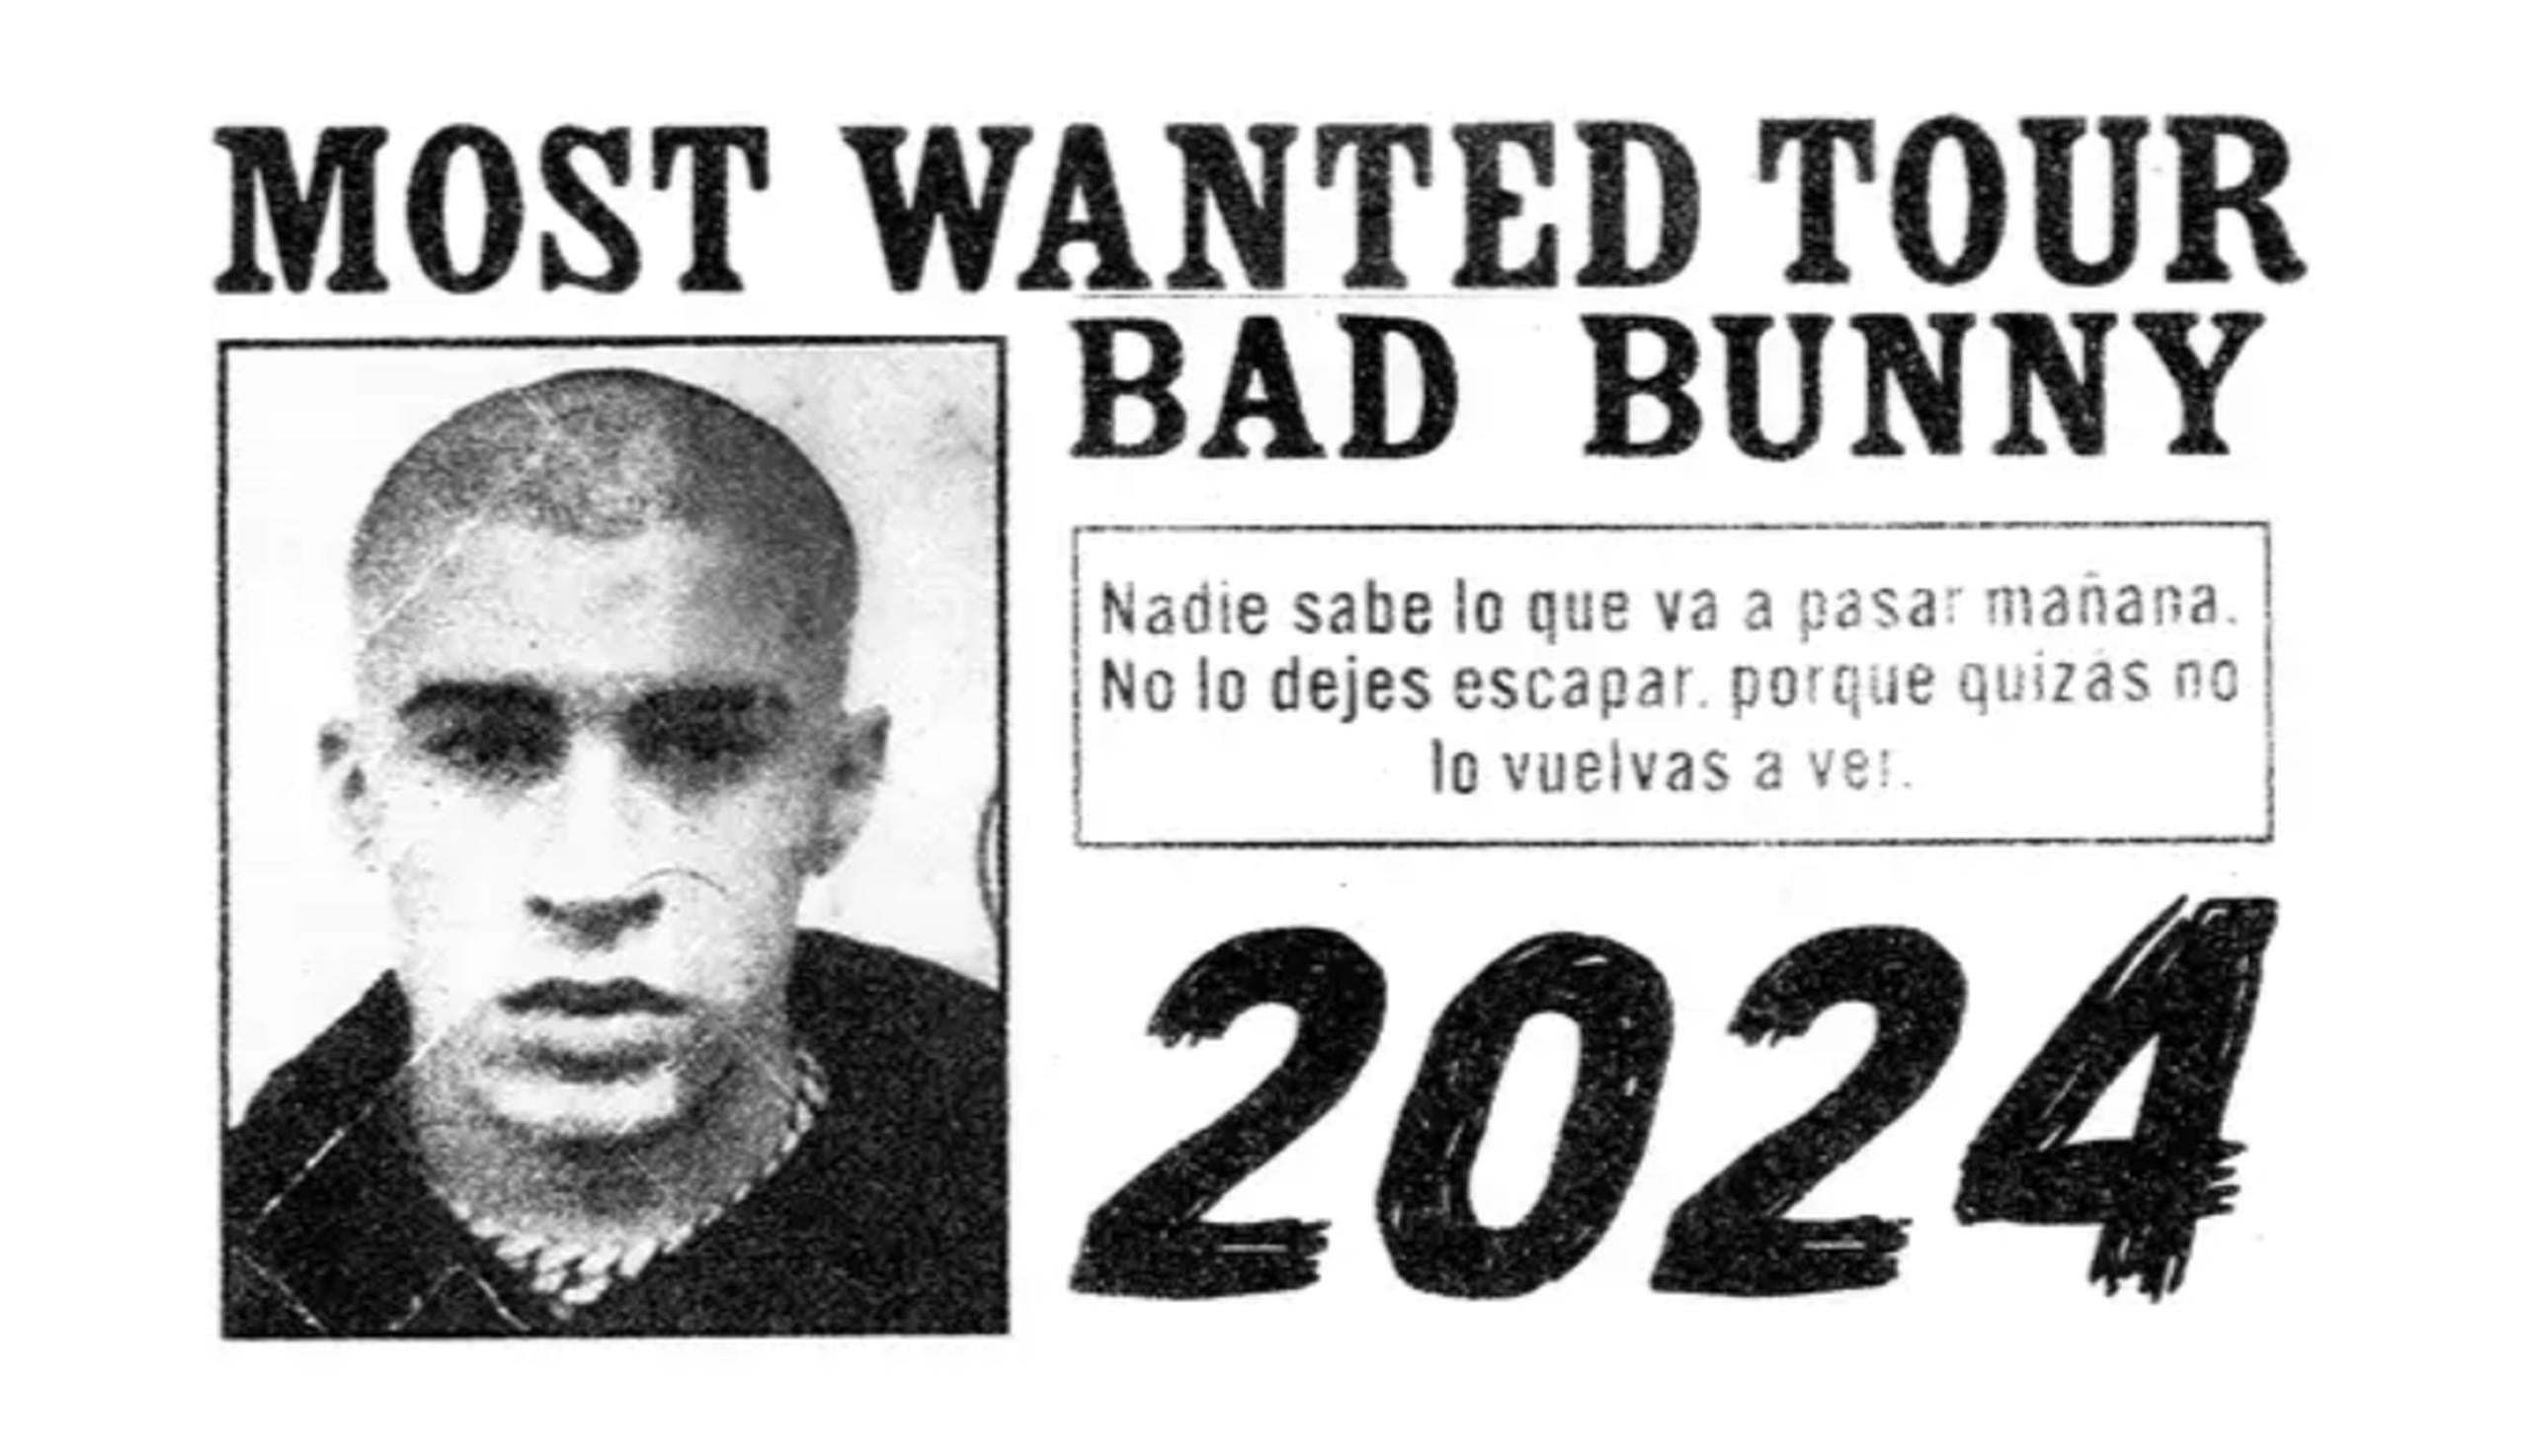 Bad Bunny "Most Wanted Tour"